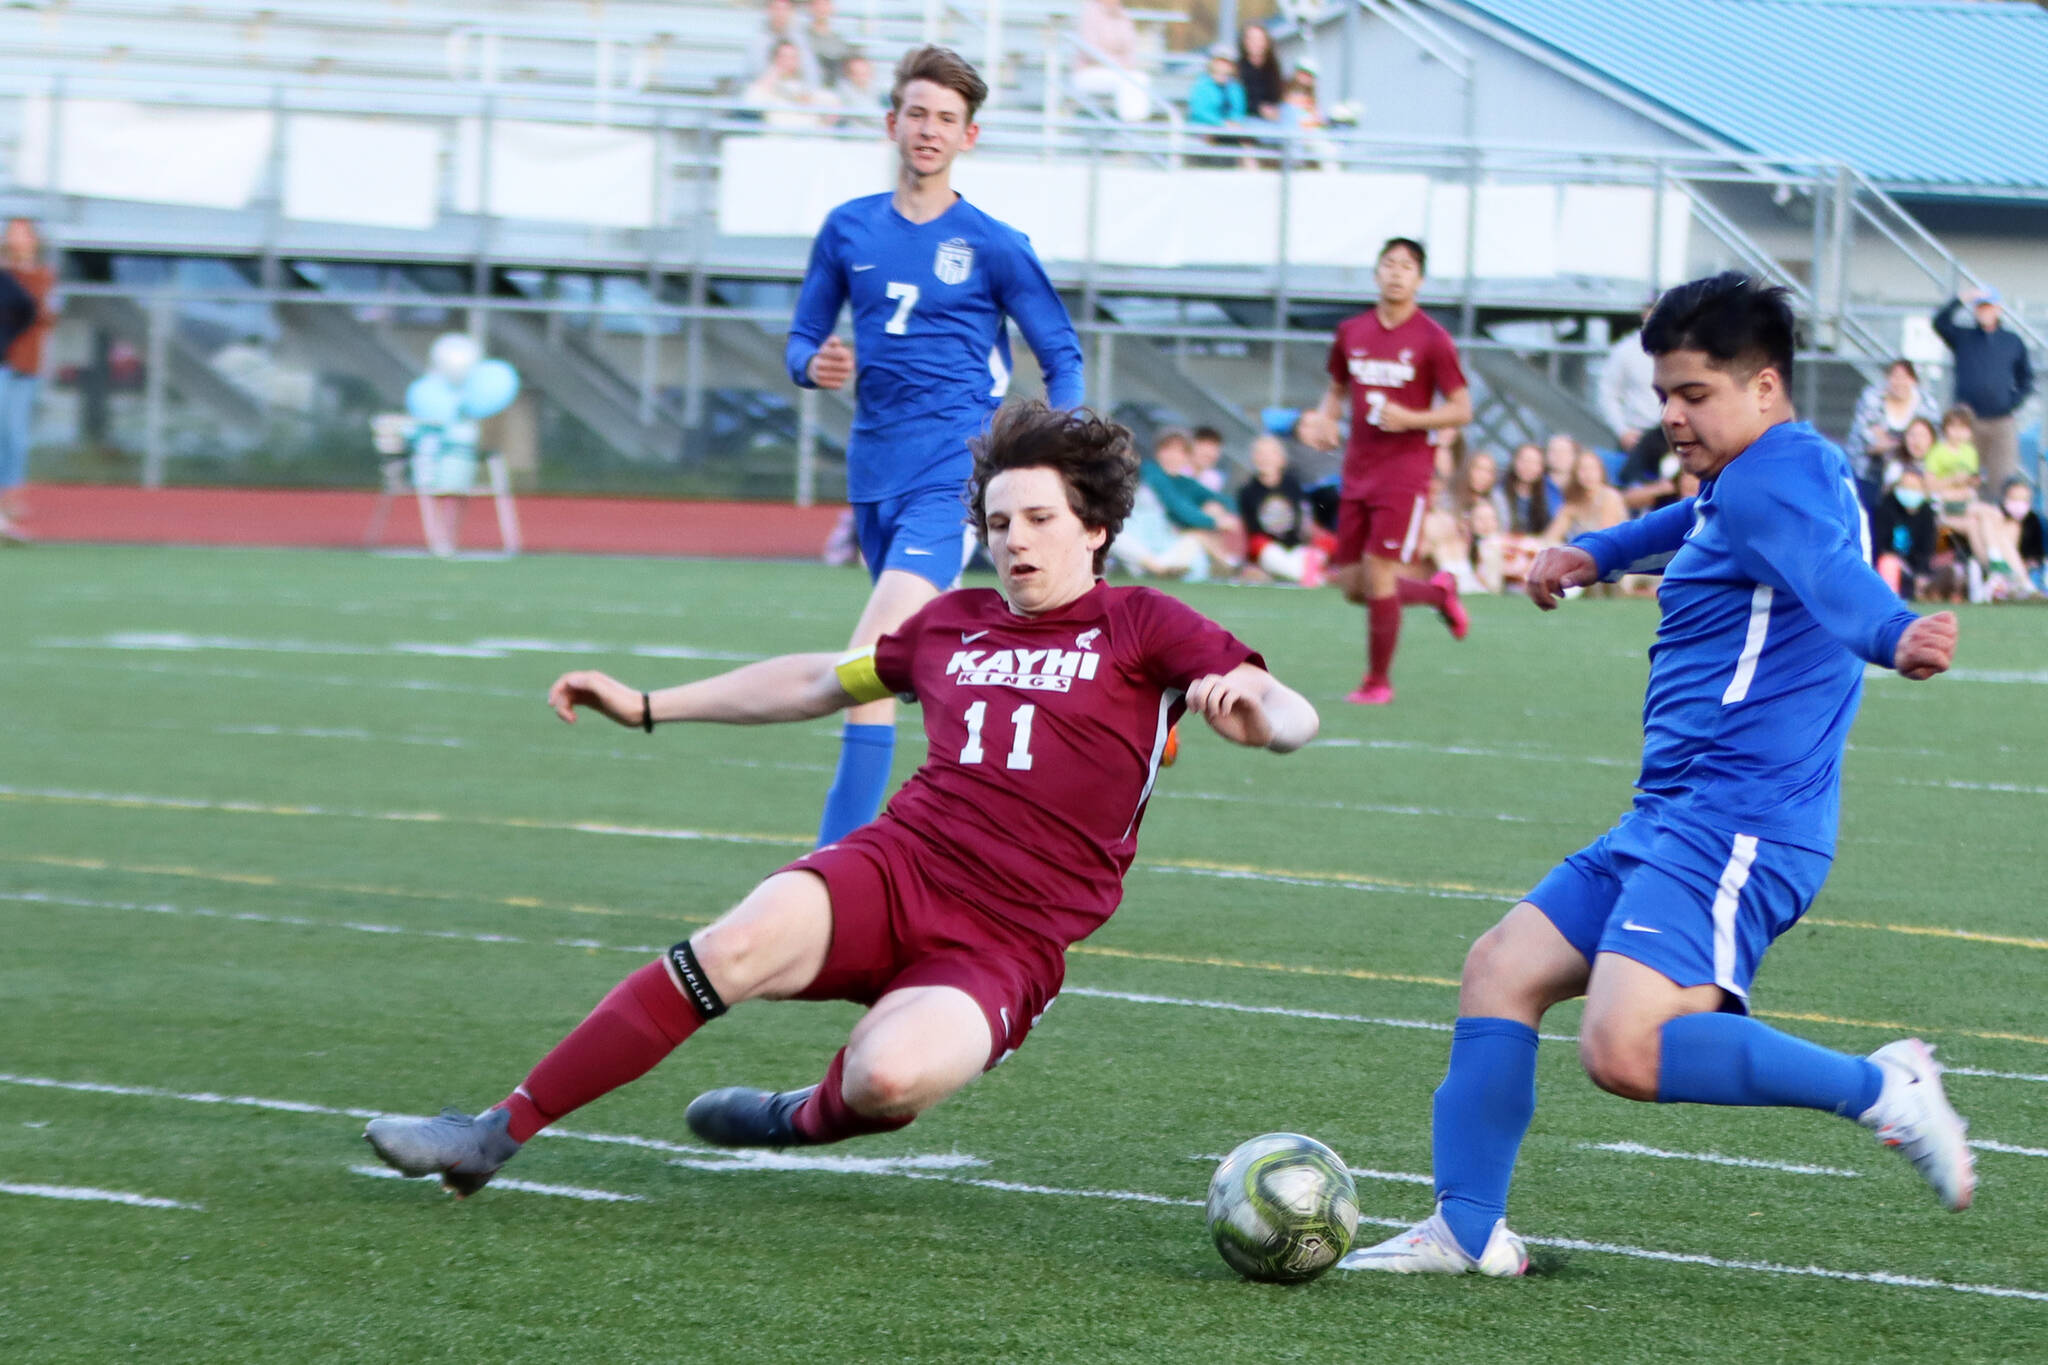 TMHS senior Omar Alvarez chips in one of his four goals on Saturday. TMHS bested Ketchikan 5-0. Senior Phil Lam scored the Falcons’ other goal of the match. “I hadn’t scored the whole season, I was what, 0-for-18? Tonight, was history for me. It was amazing,” Alvarez said. (Ben Hohenstatt / Juneau Empire)